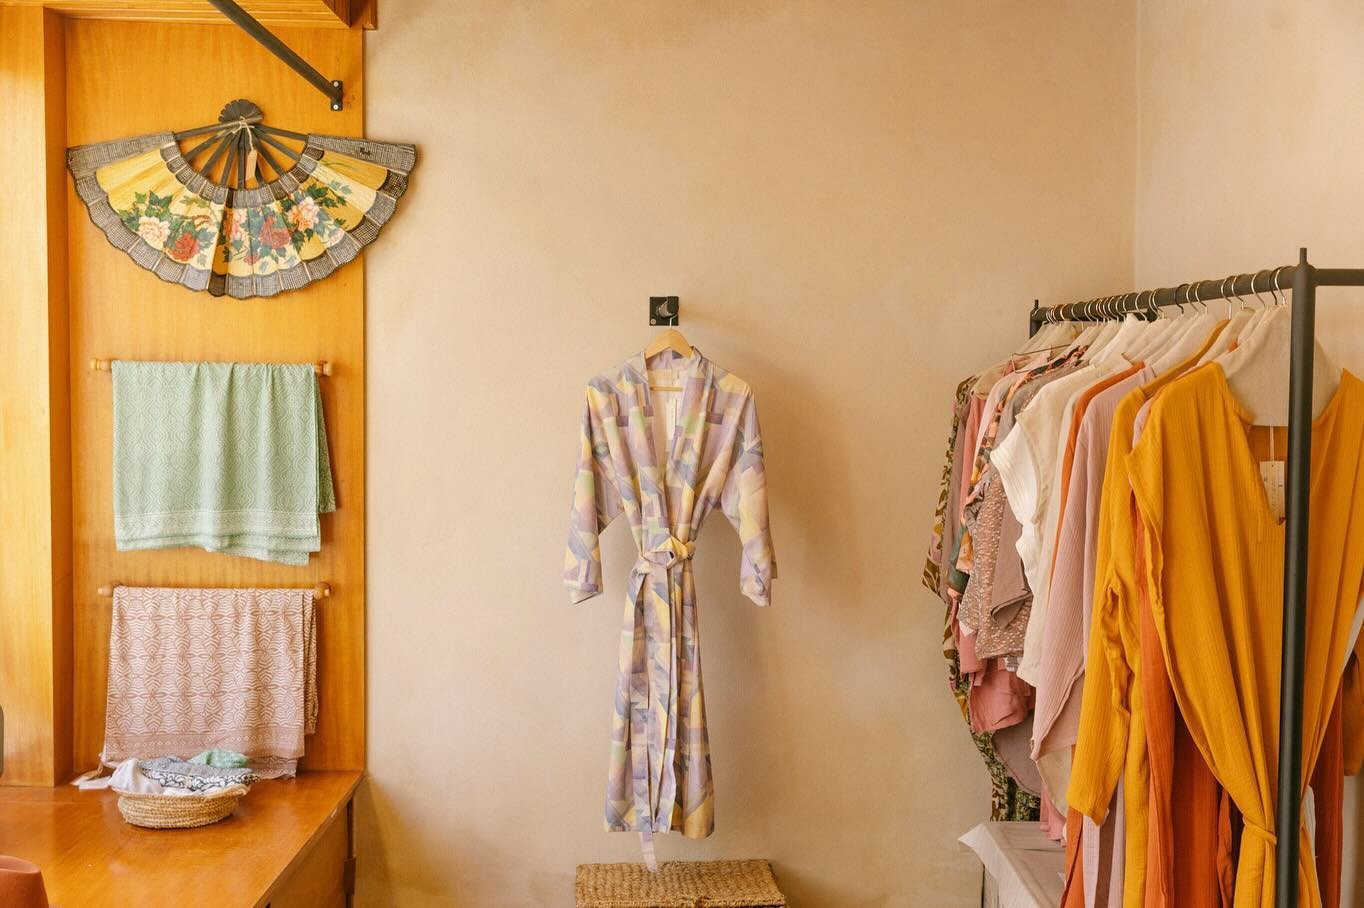 Our new Saints at Sea Shop in Ericeira🌞

Peruse our selection of garments crafted from linen, muslin, and silk. Each piece of garment is designed and handmade in Ericeira, Portugal.